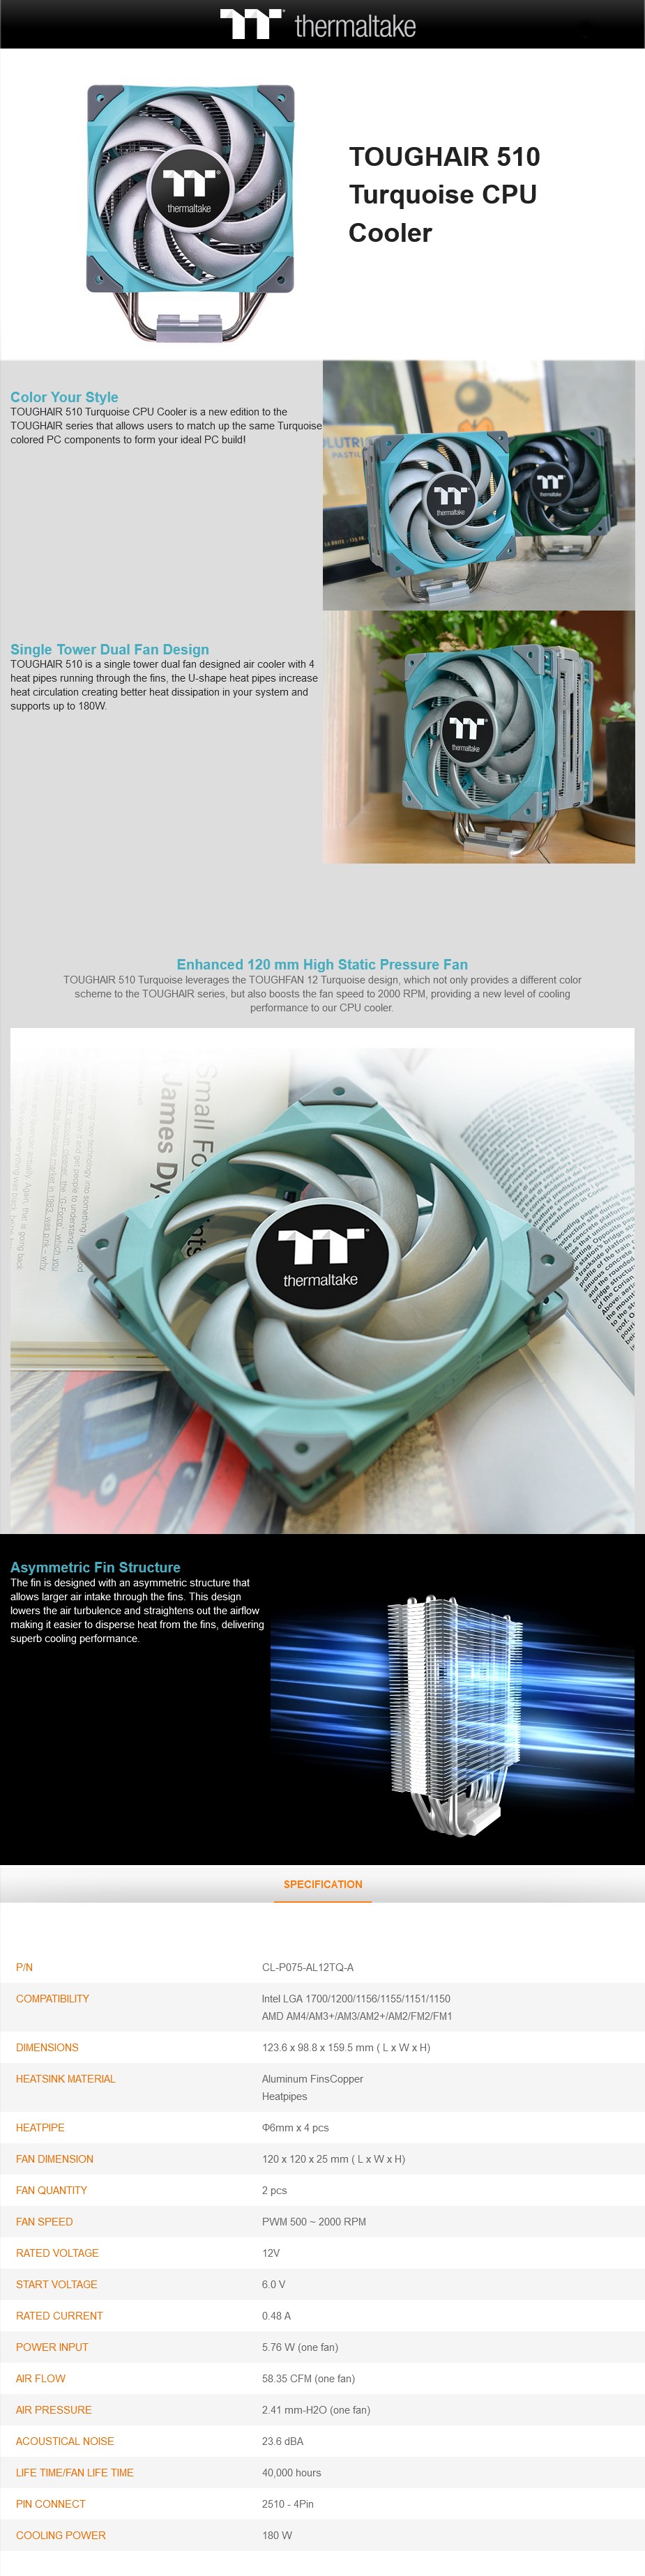 Thermaltake TOUGHAIR 510 Dual Fan CPU Cooler - Turquoise - Overview 1